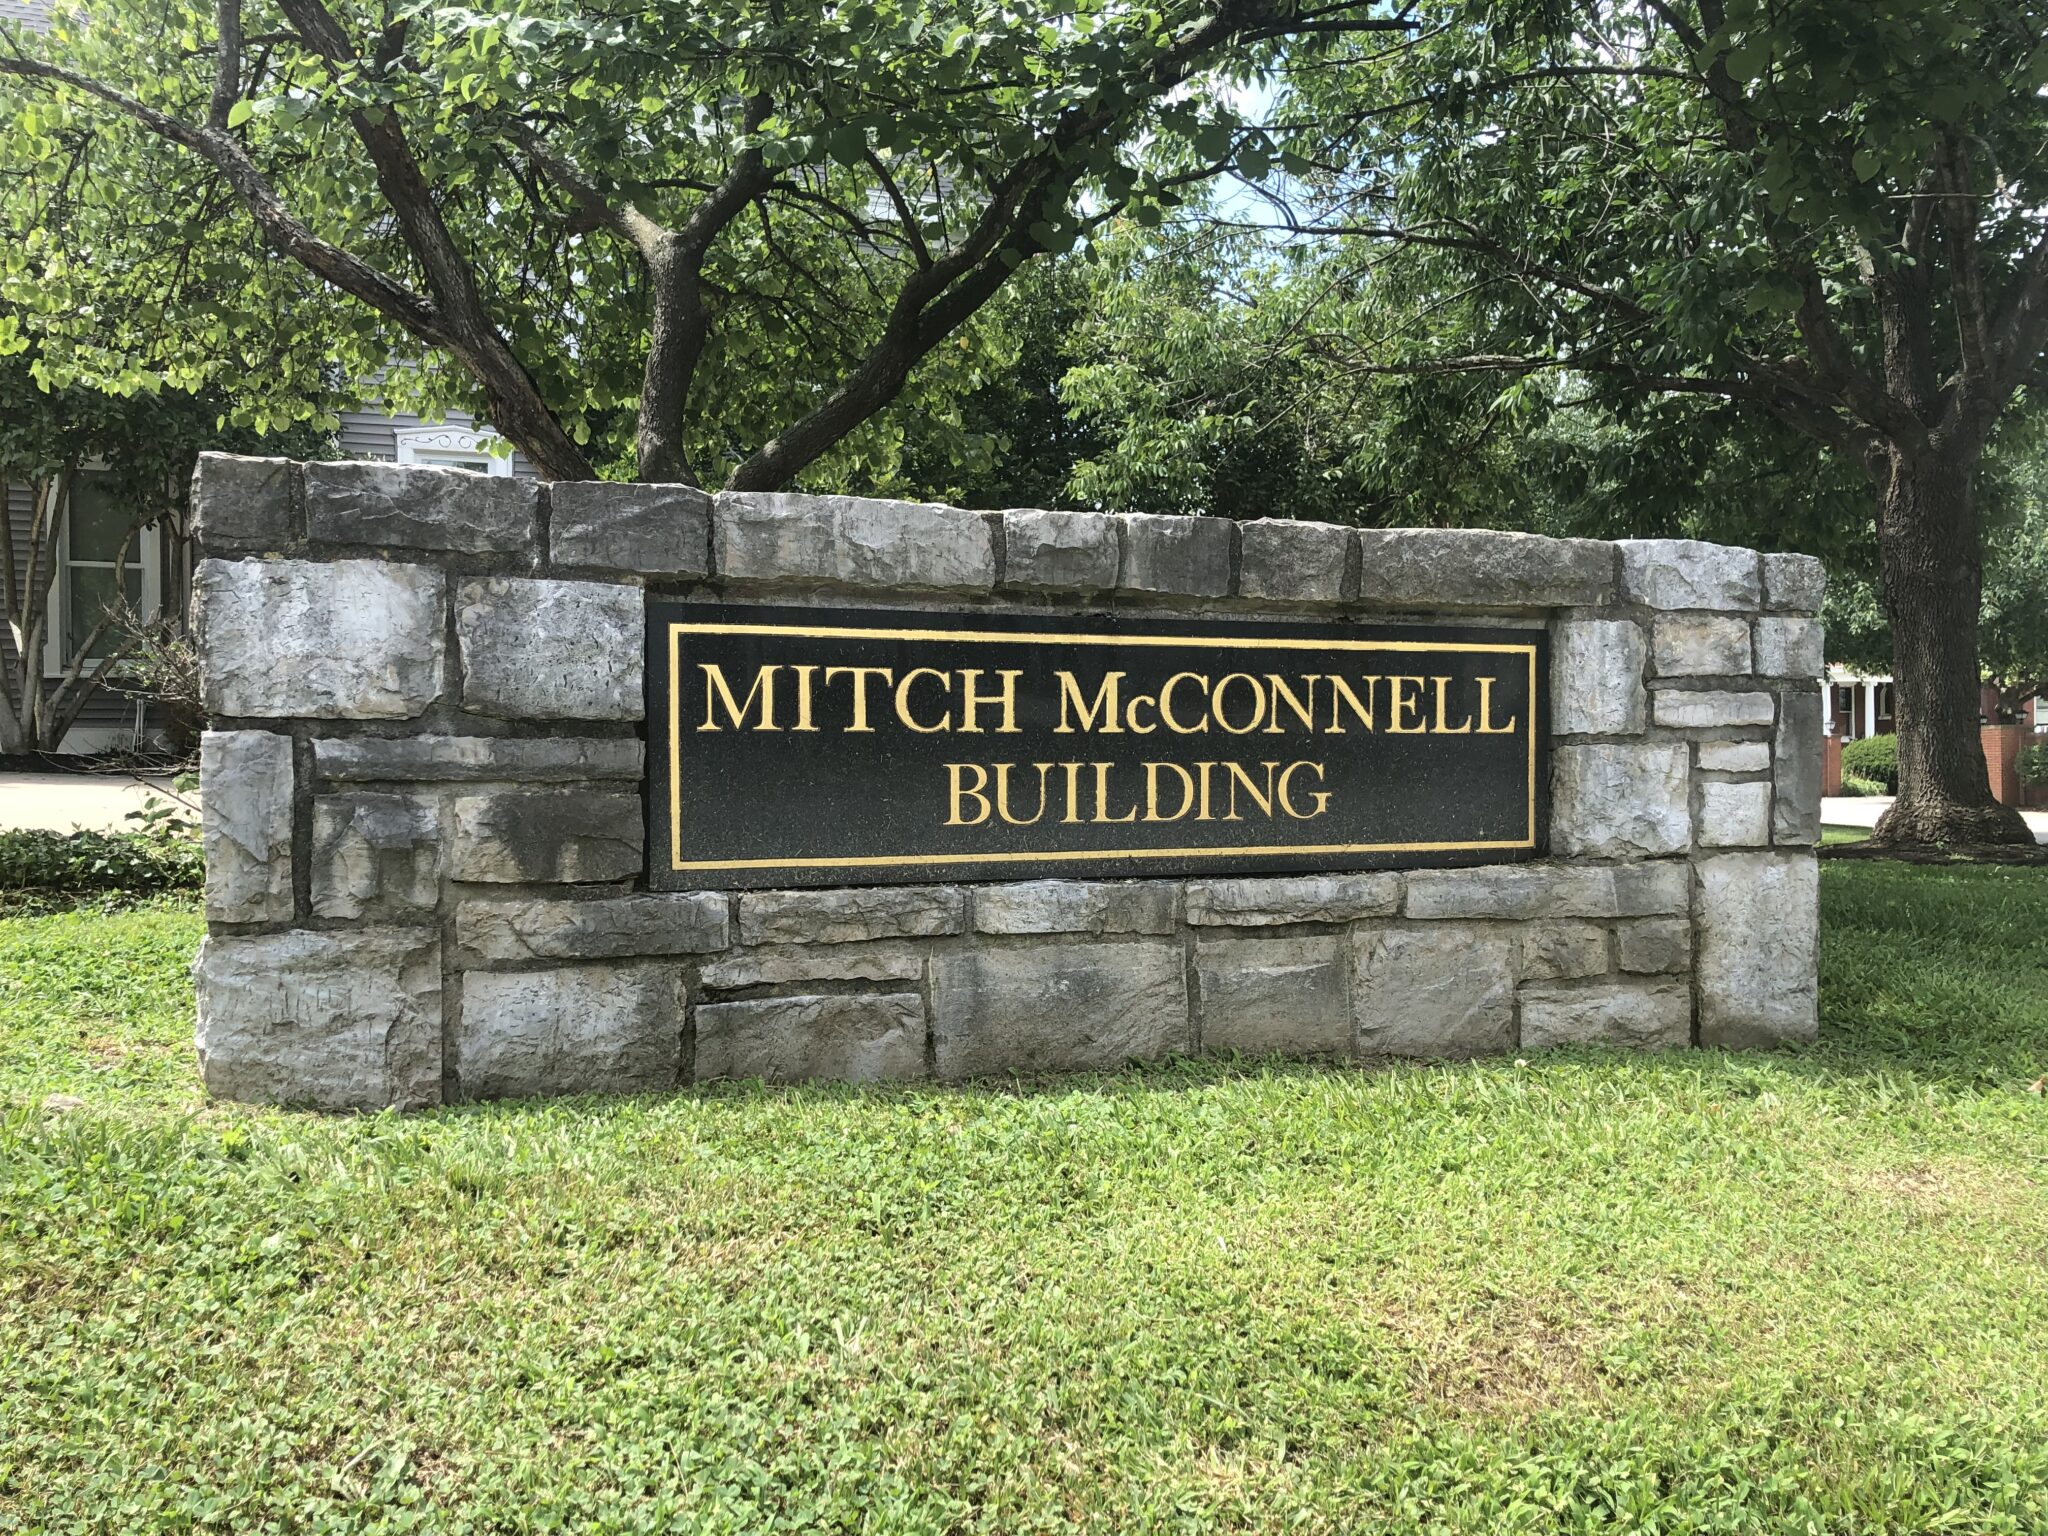 Mitch McConnell building sign